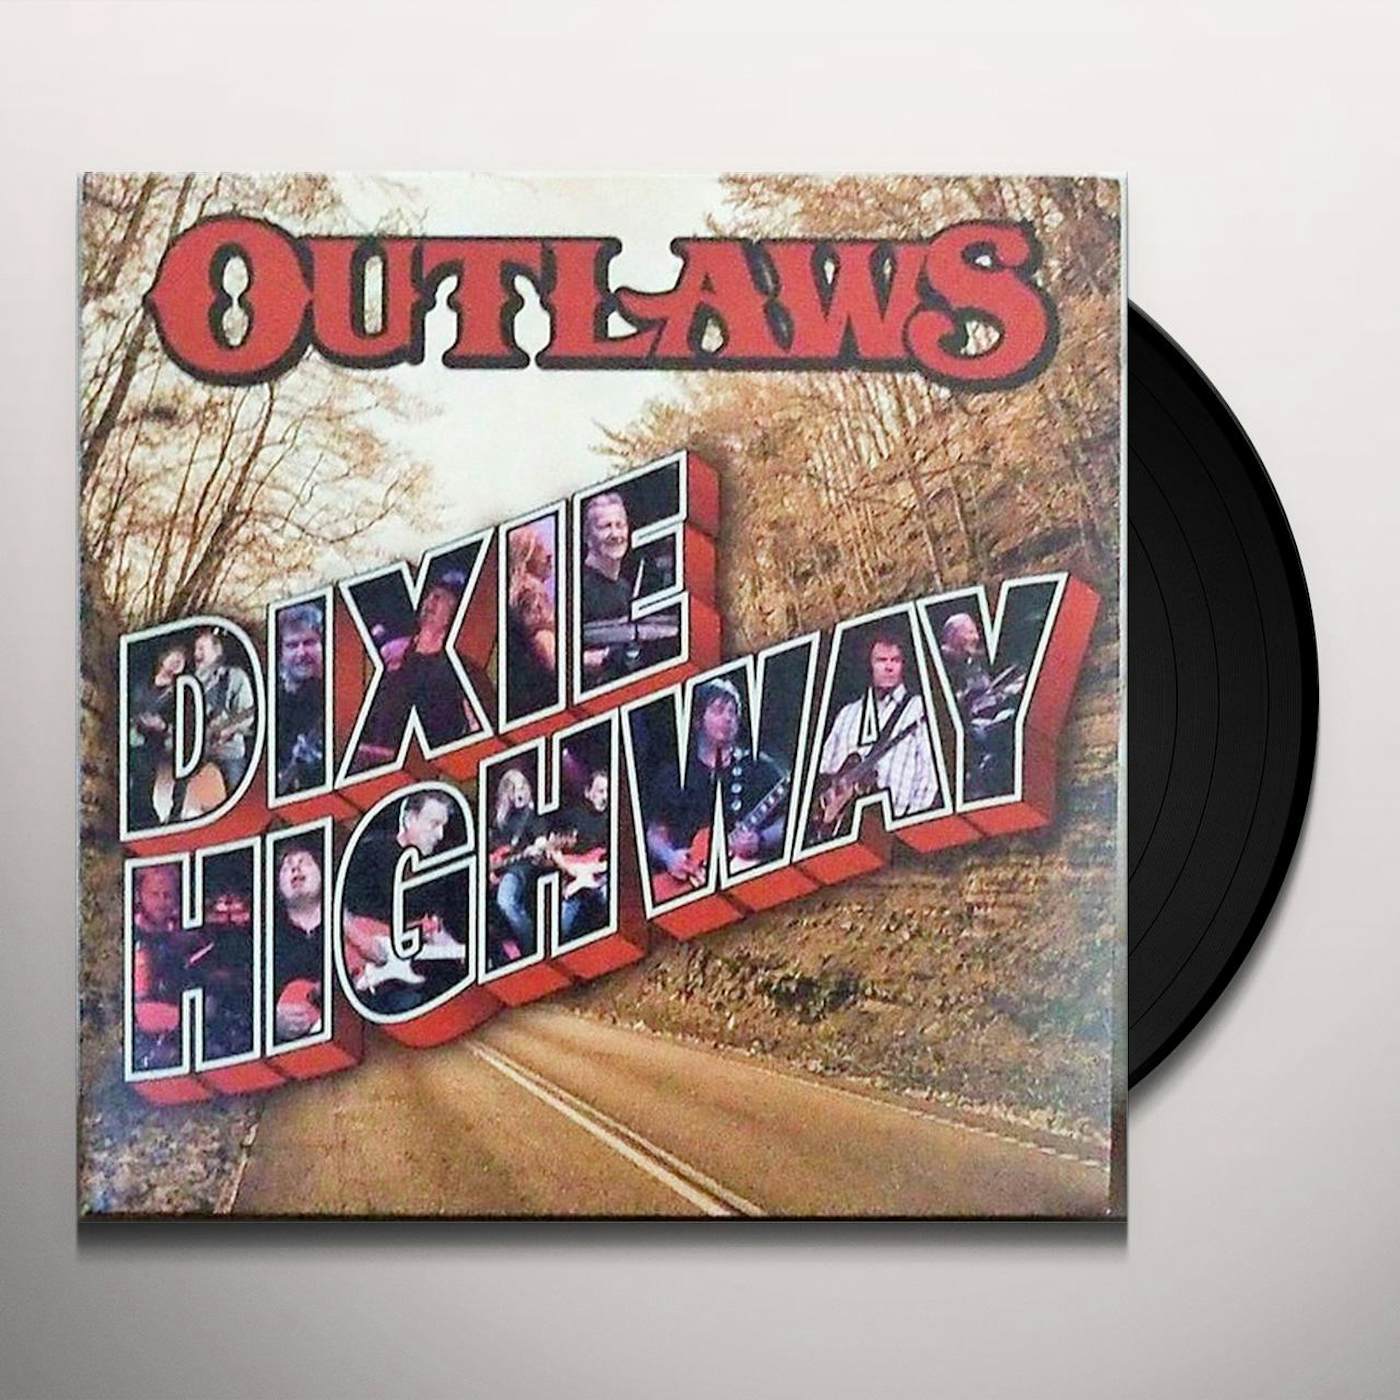 Outlaws Dixie Highway Vinyl Record